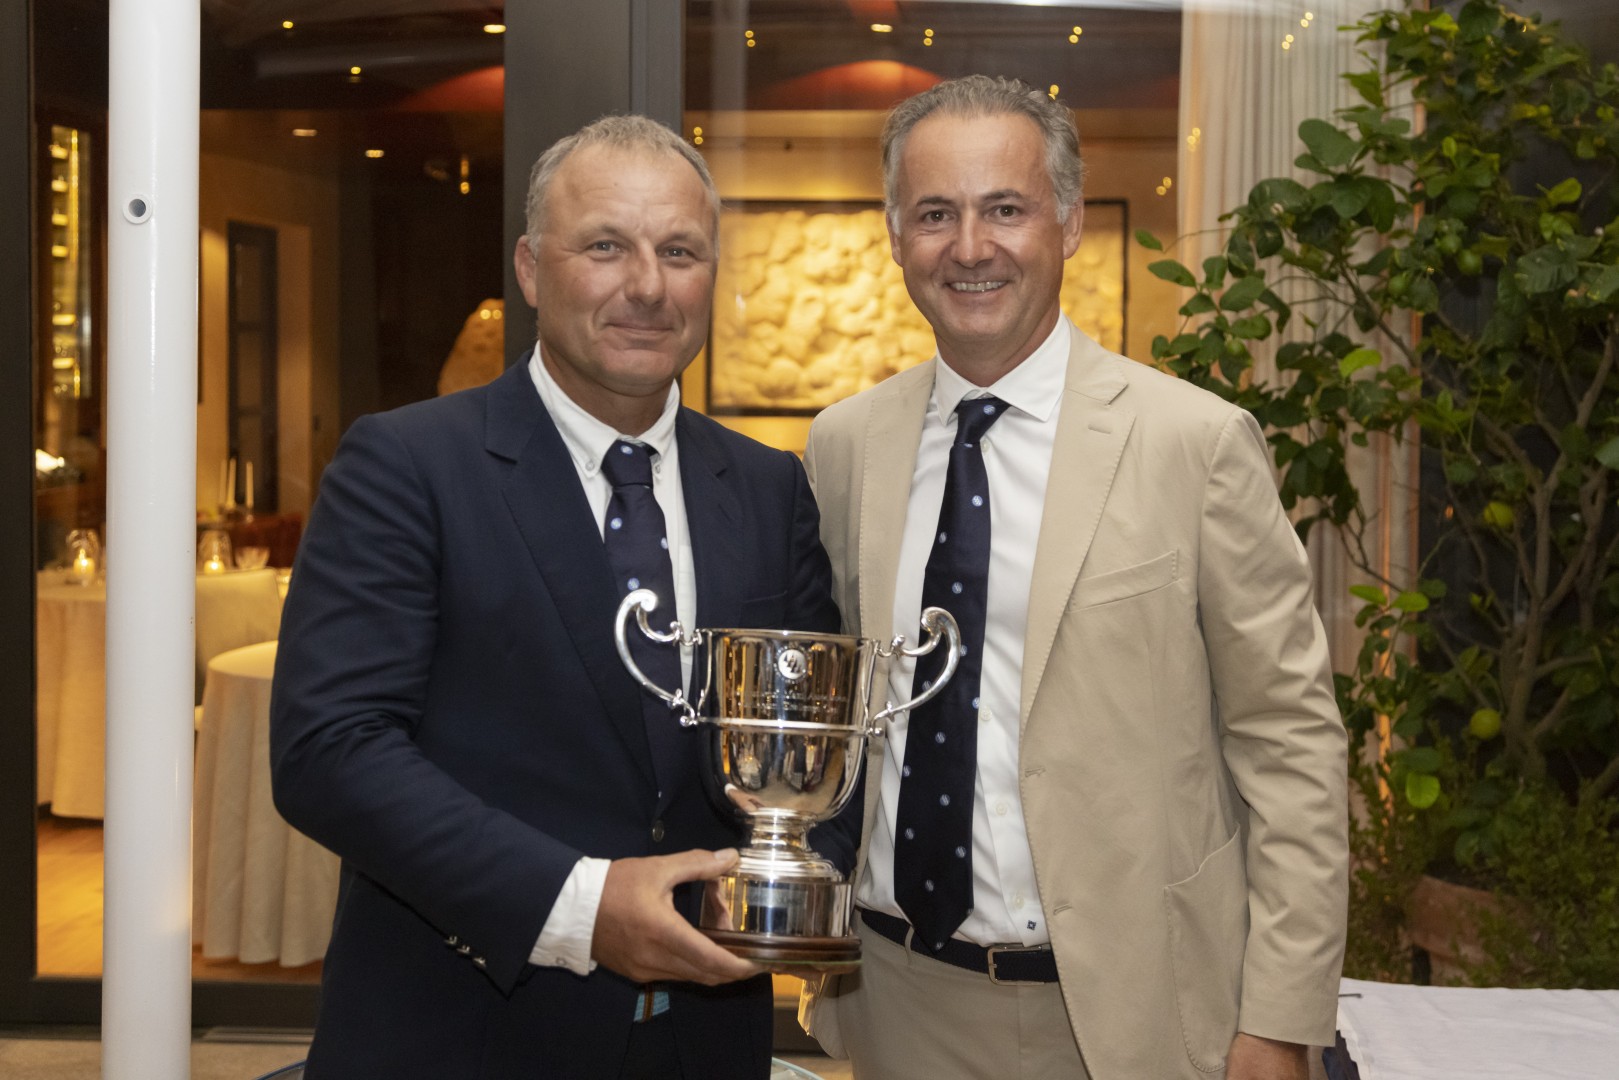 I Love Poland's skipper Grzegorz Baranowski is presented with the IMA Caribbean Maxi Challenge prize by IMA President Benoît de Froidmont.